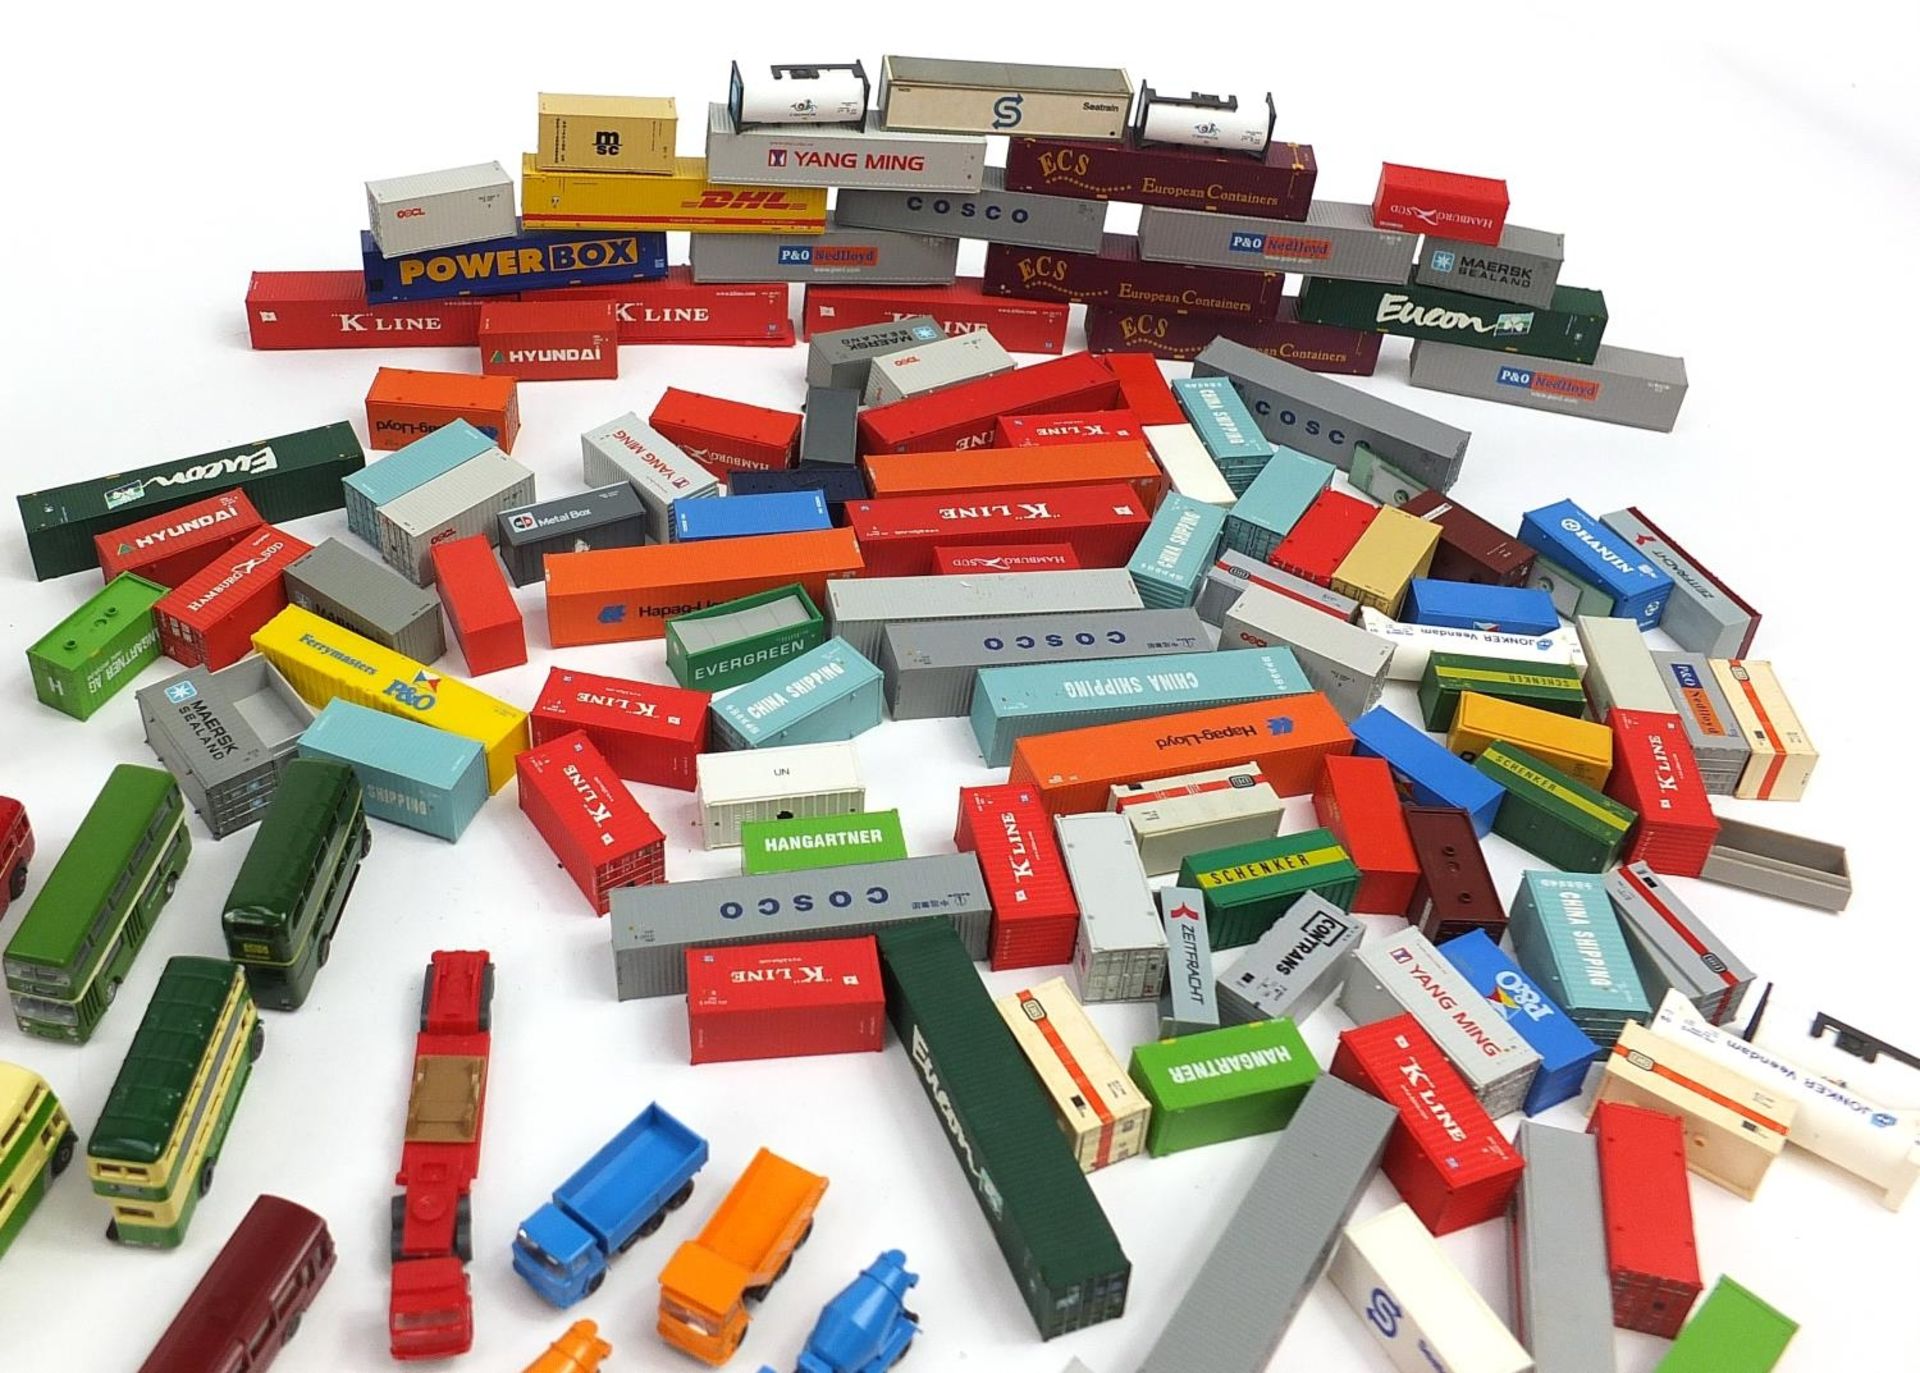 Large collection of N gauge model railway advertising vehicles, freight containers and accessories - Image 5 of 9